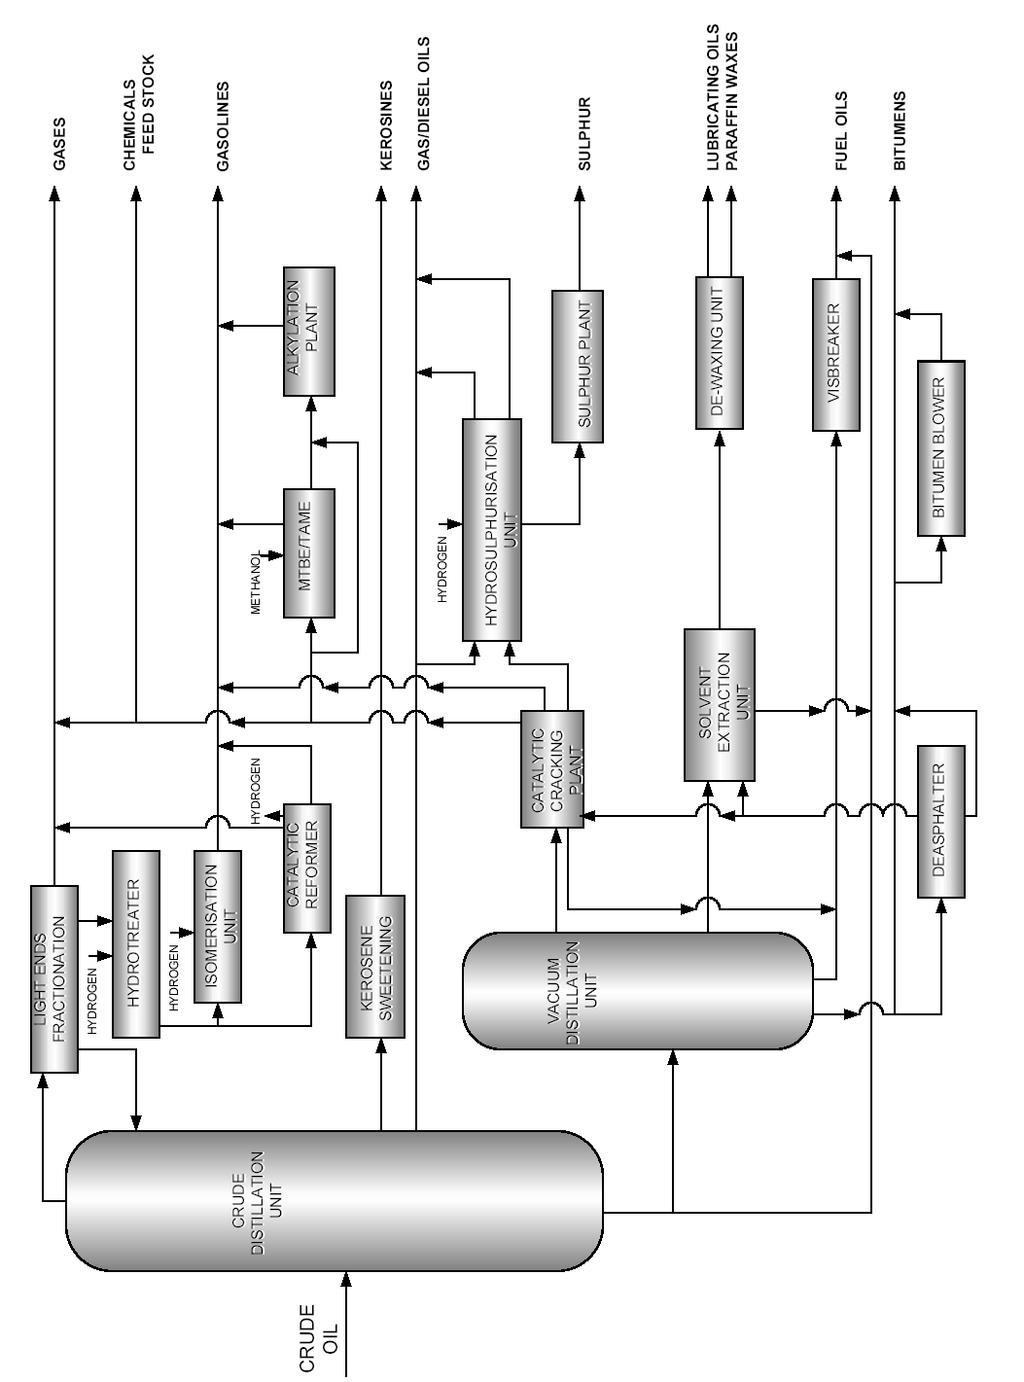 Schematic of an Oil Refinery Process